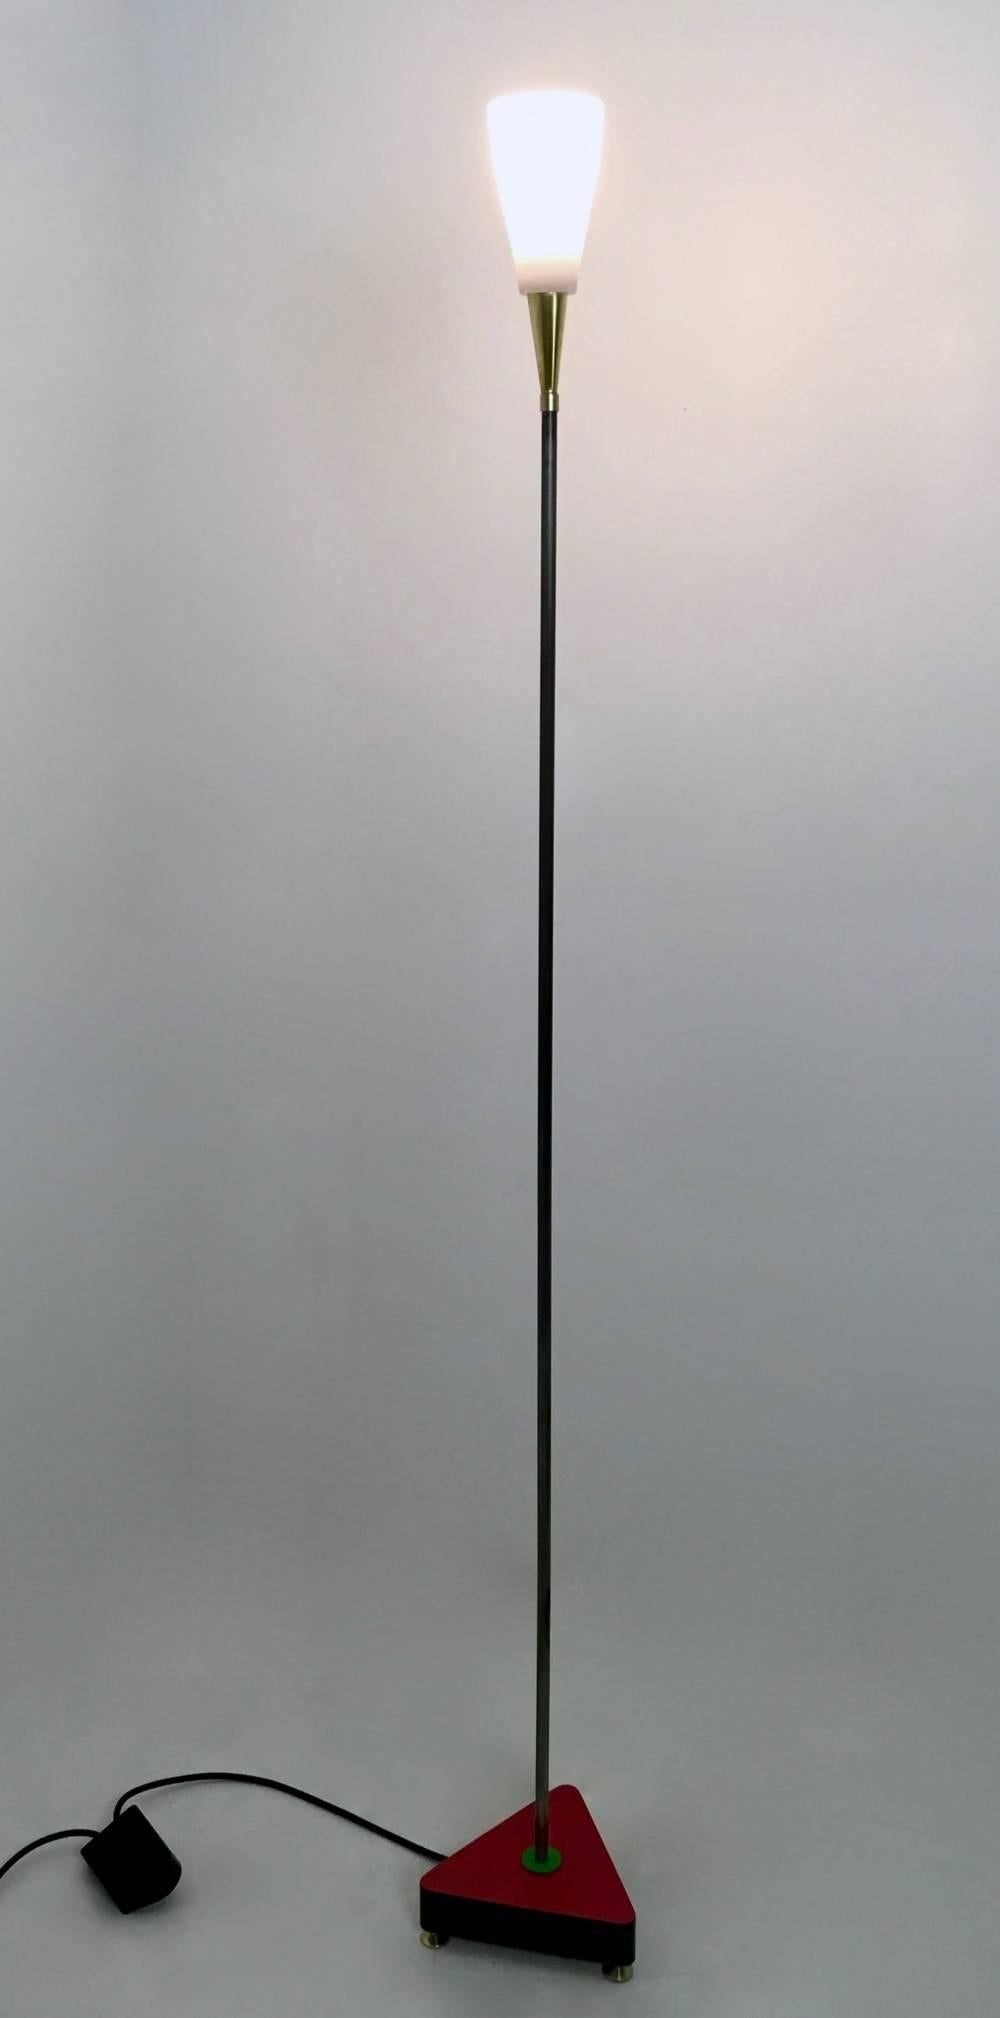 This floor lamp is made in lacquered wood, iron polished with shellac, formica, lacquered metal and brass. It features an etched glass lampshade. 
It is one-of-a-kind.
In mint condition and ready to give a beautiful ambiance to any